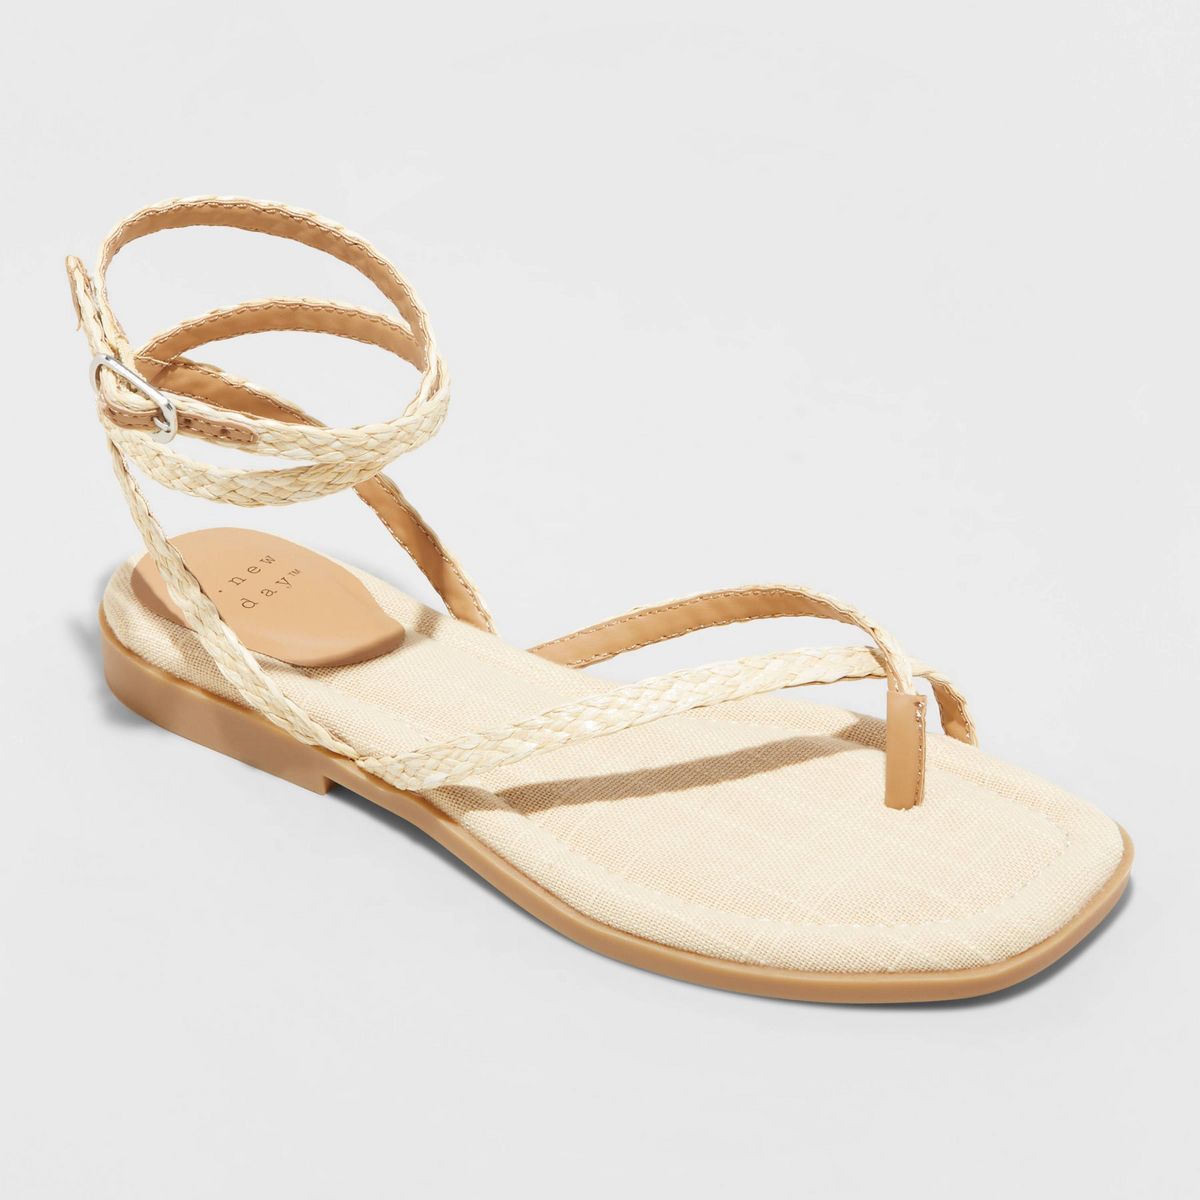 Women's Luisa Ankle Strap Thong Sandals - A New Day™ Beige 8.5 | Target